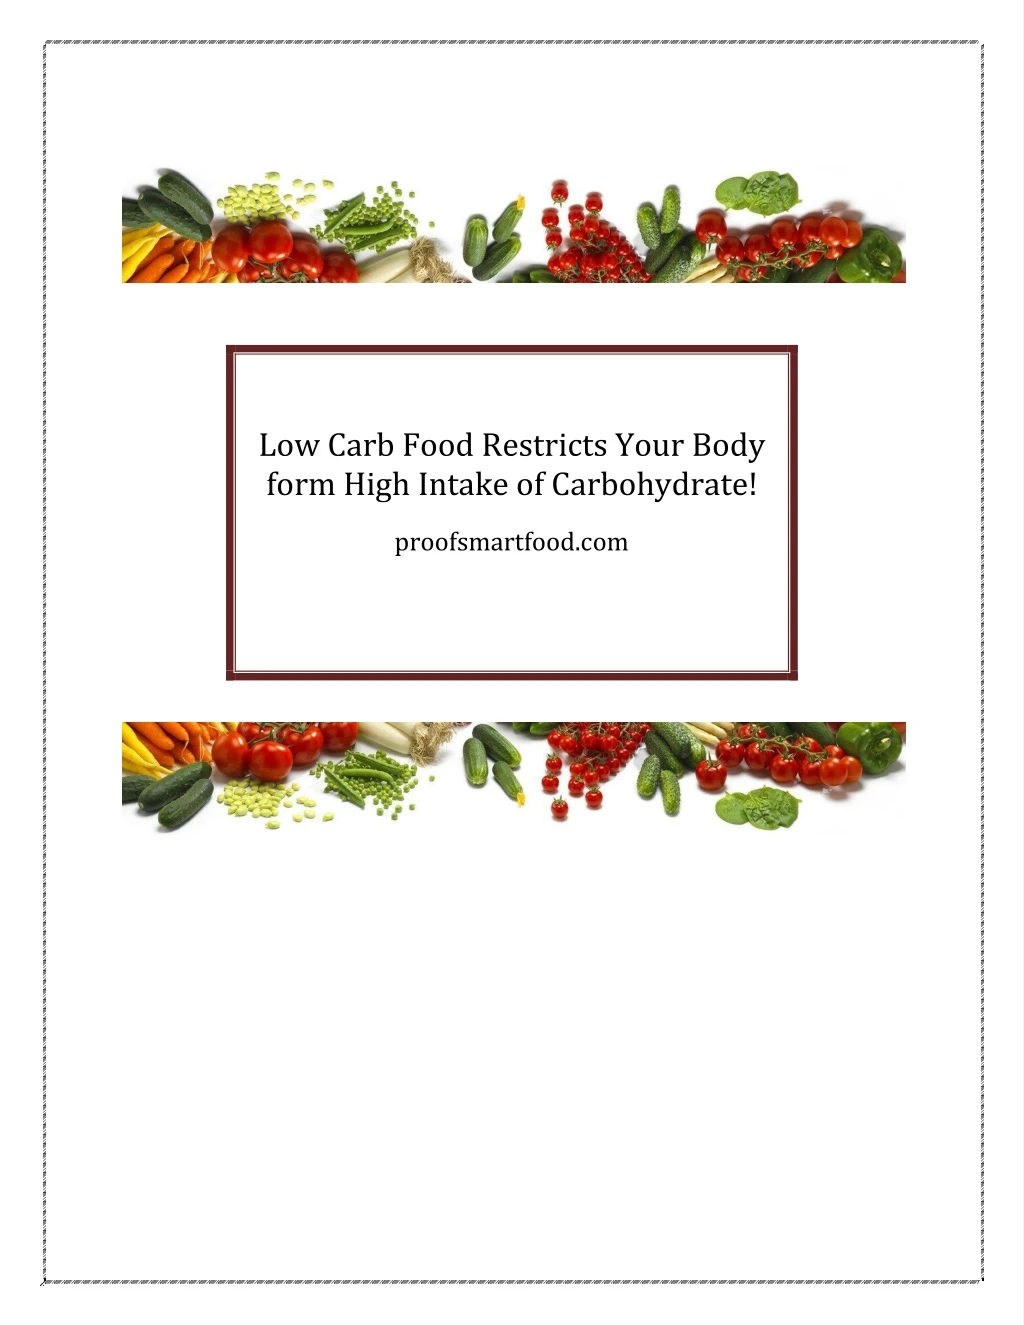 low carb food restricts your body form high